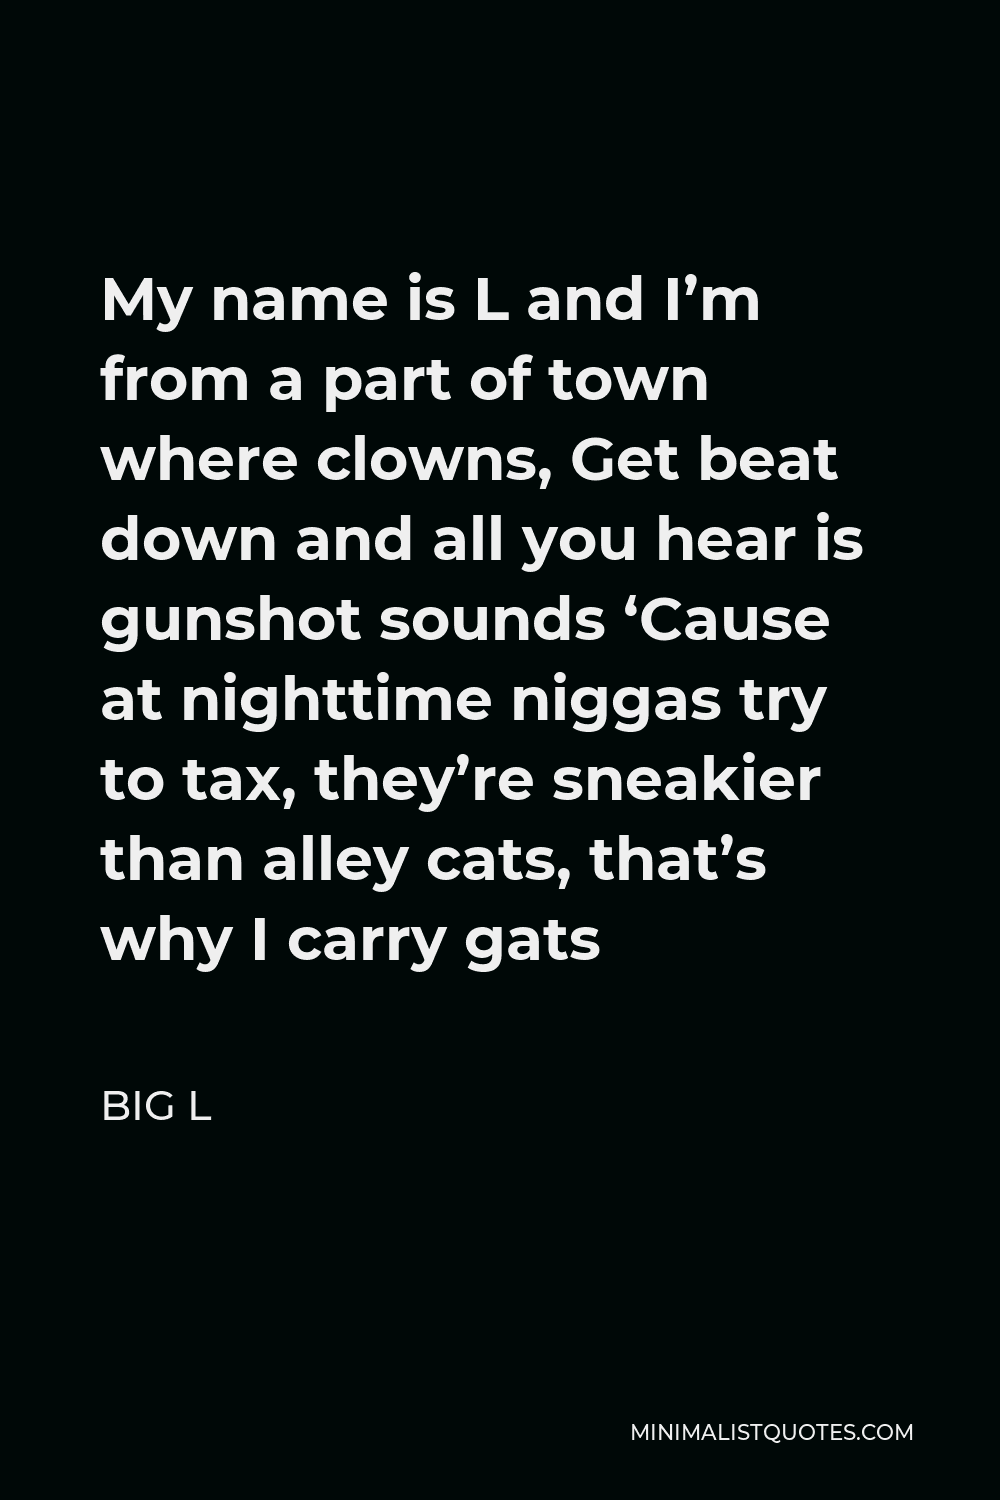 Big L Quote - My name is L and I’m from a part of town where clowns, Get beat down and all you hear is gunshot sounds ‘Cause at nighttime niggas try to tax, they’re sneakier than alley cats, that’s why I carry gats